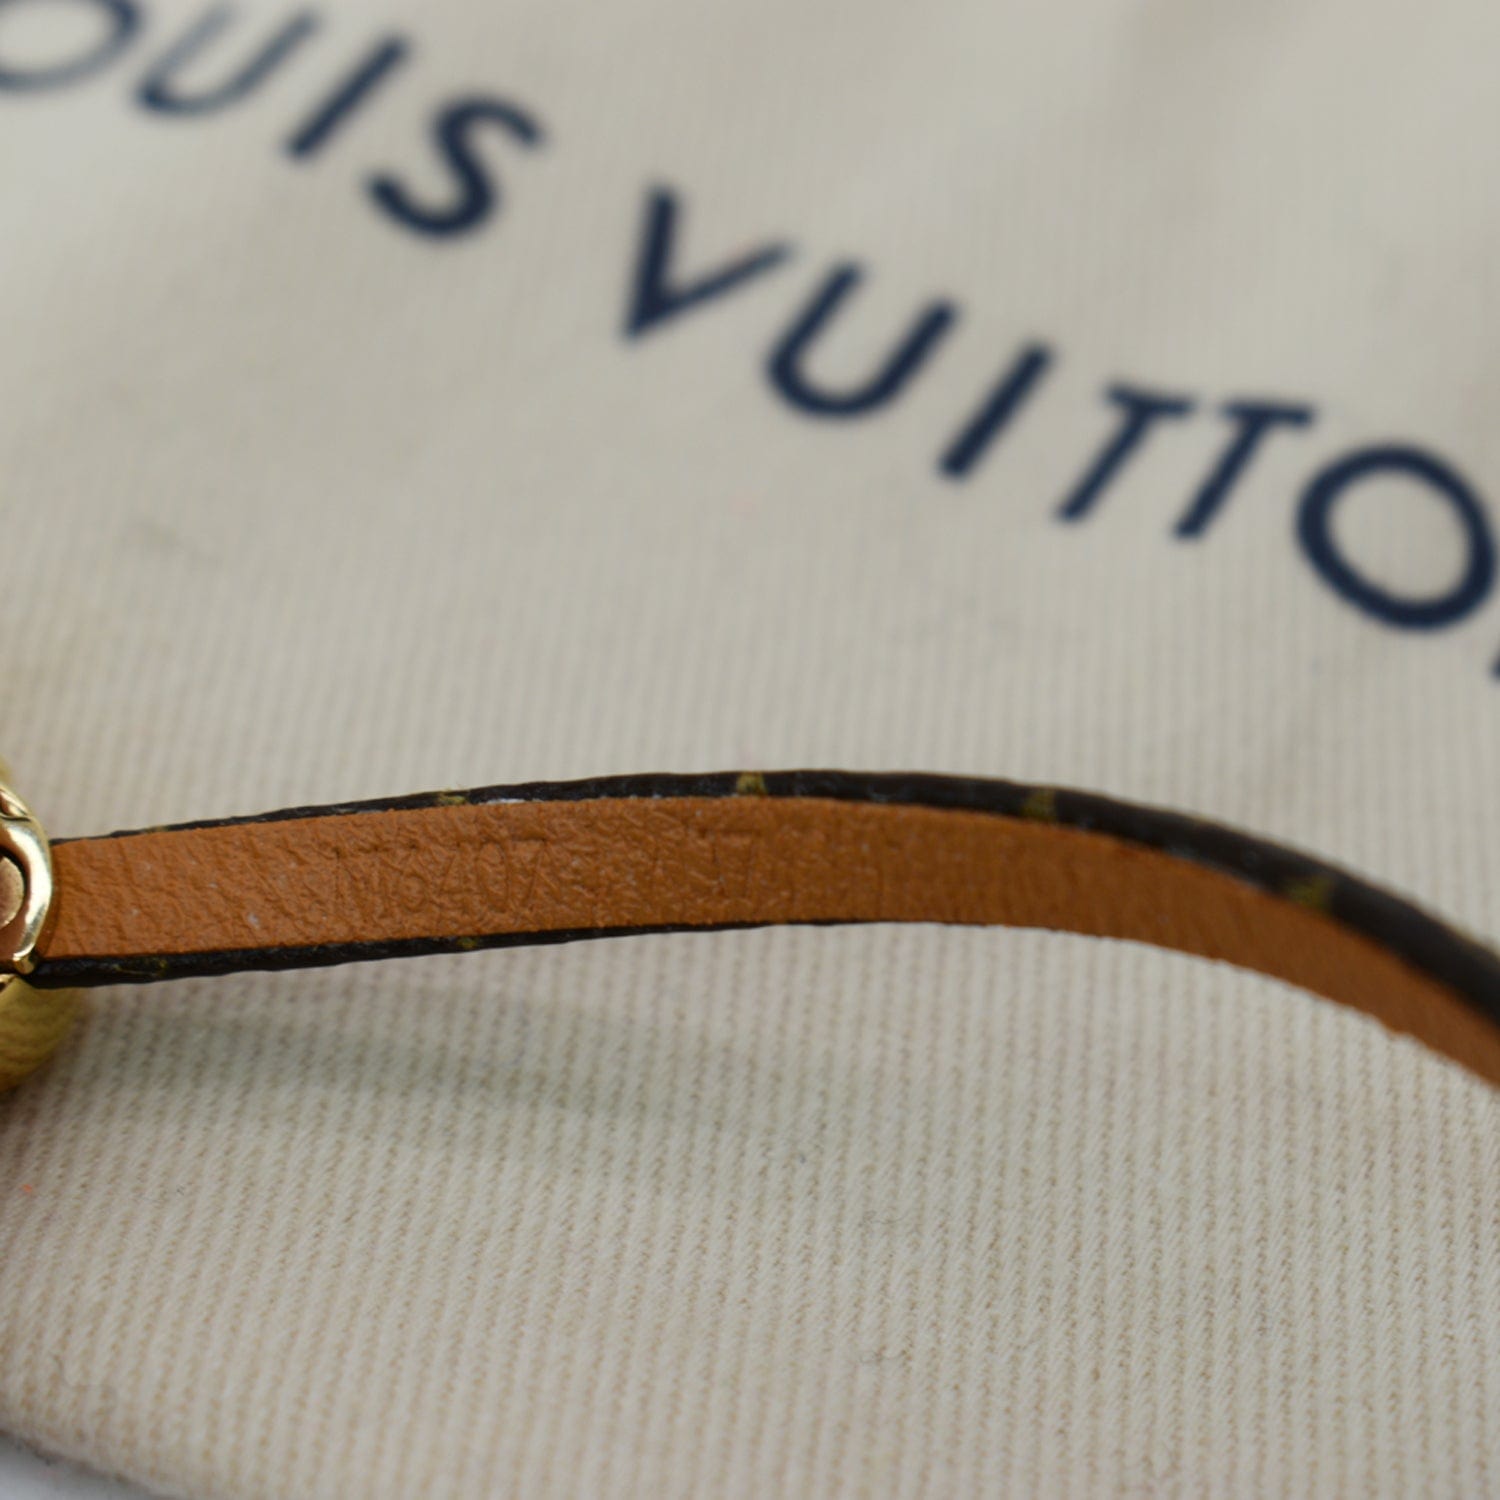 3857 Louis Vuitton Bracelet Stock Photos HighRes Pictures and Images   Getty Images